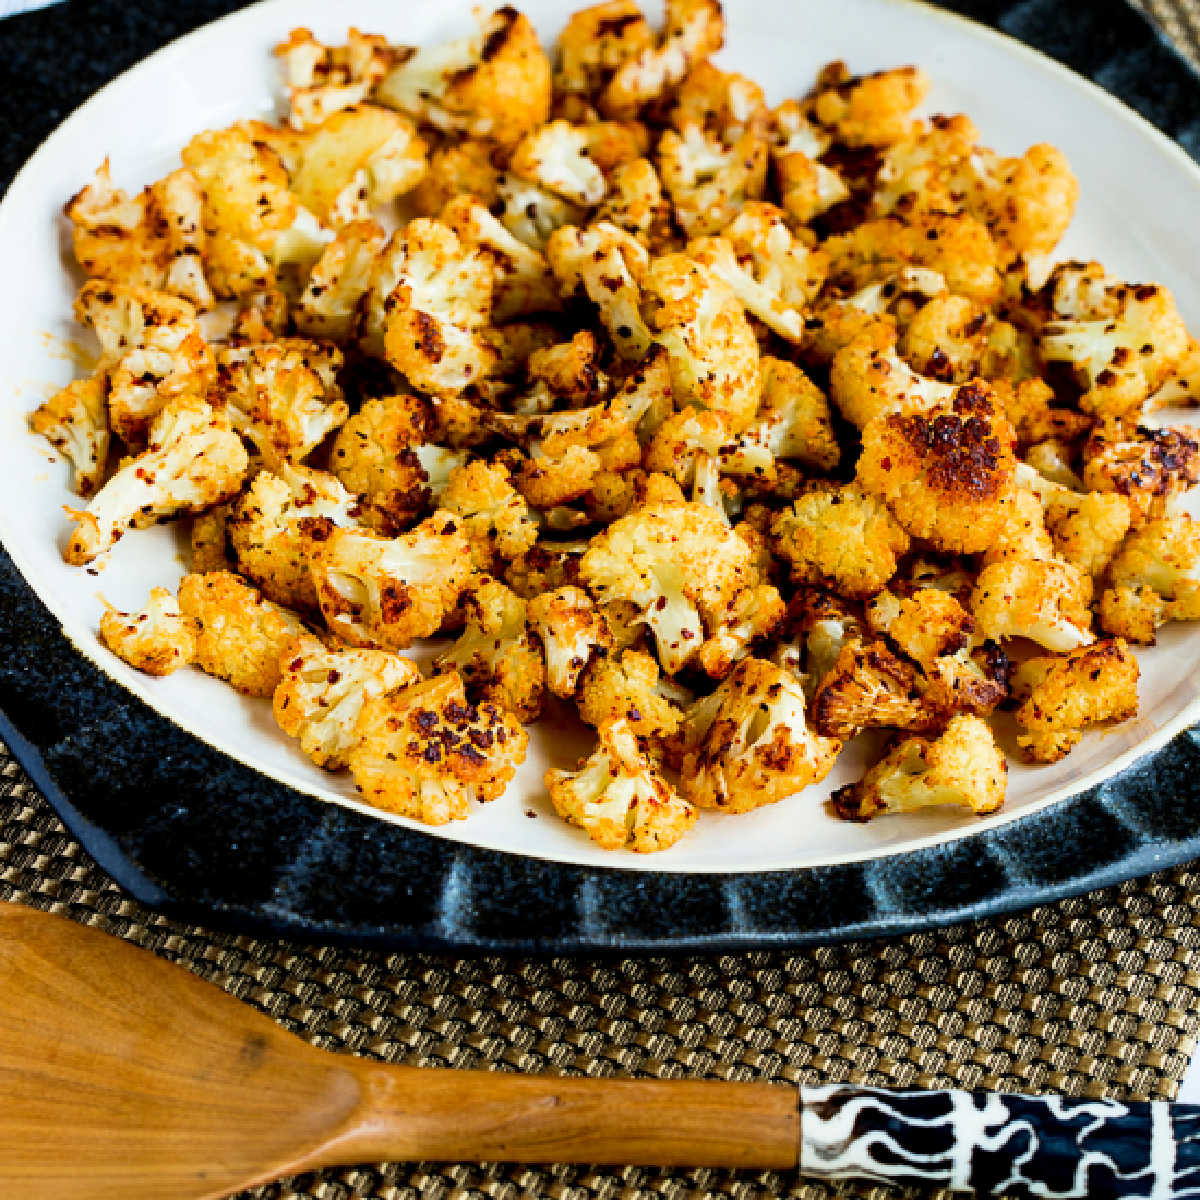 Square image for Roasted Spicy Cauliflower shown on serving plate with decorative serving spoon.